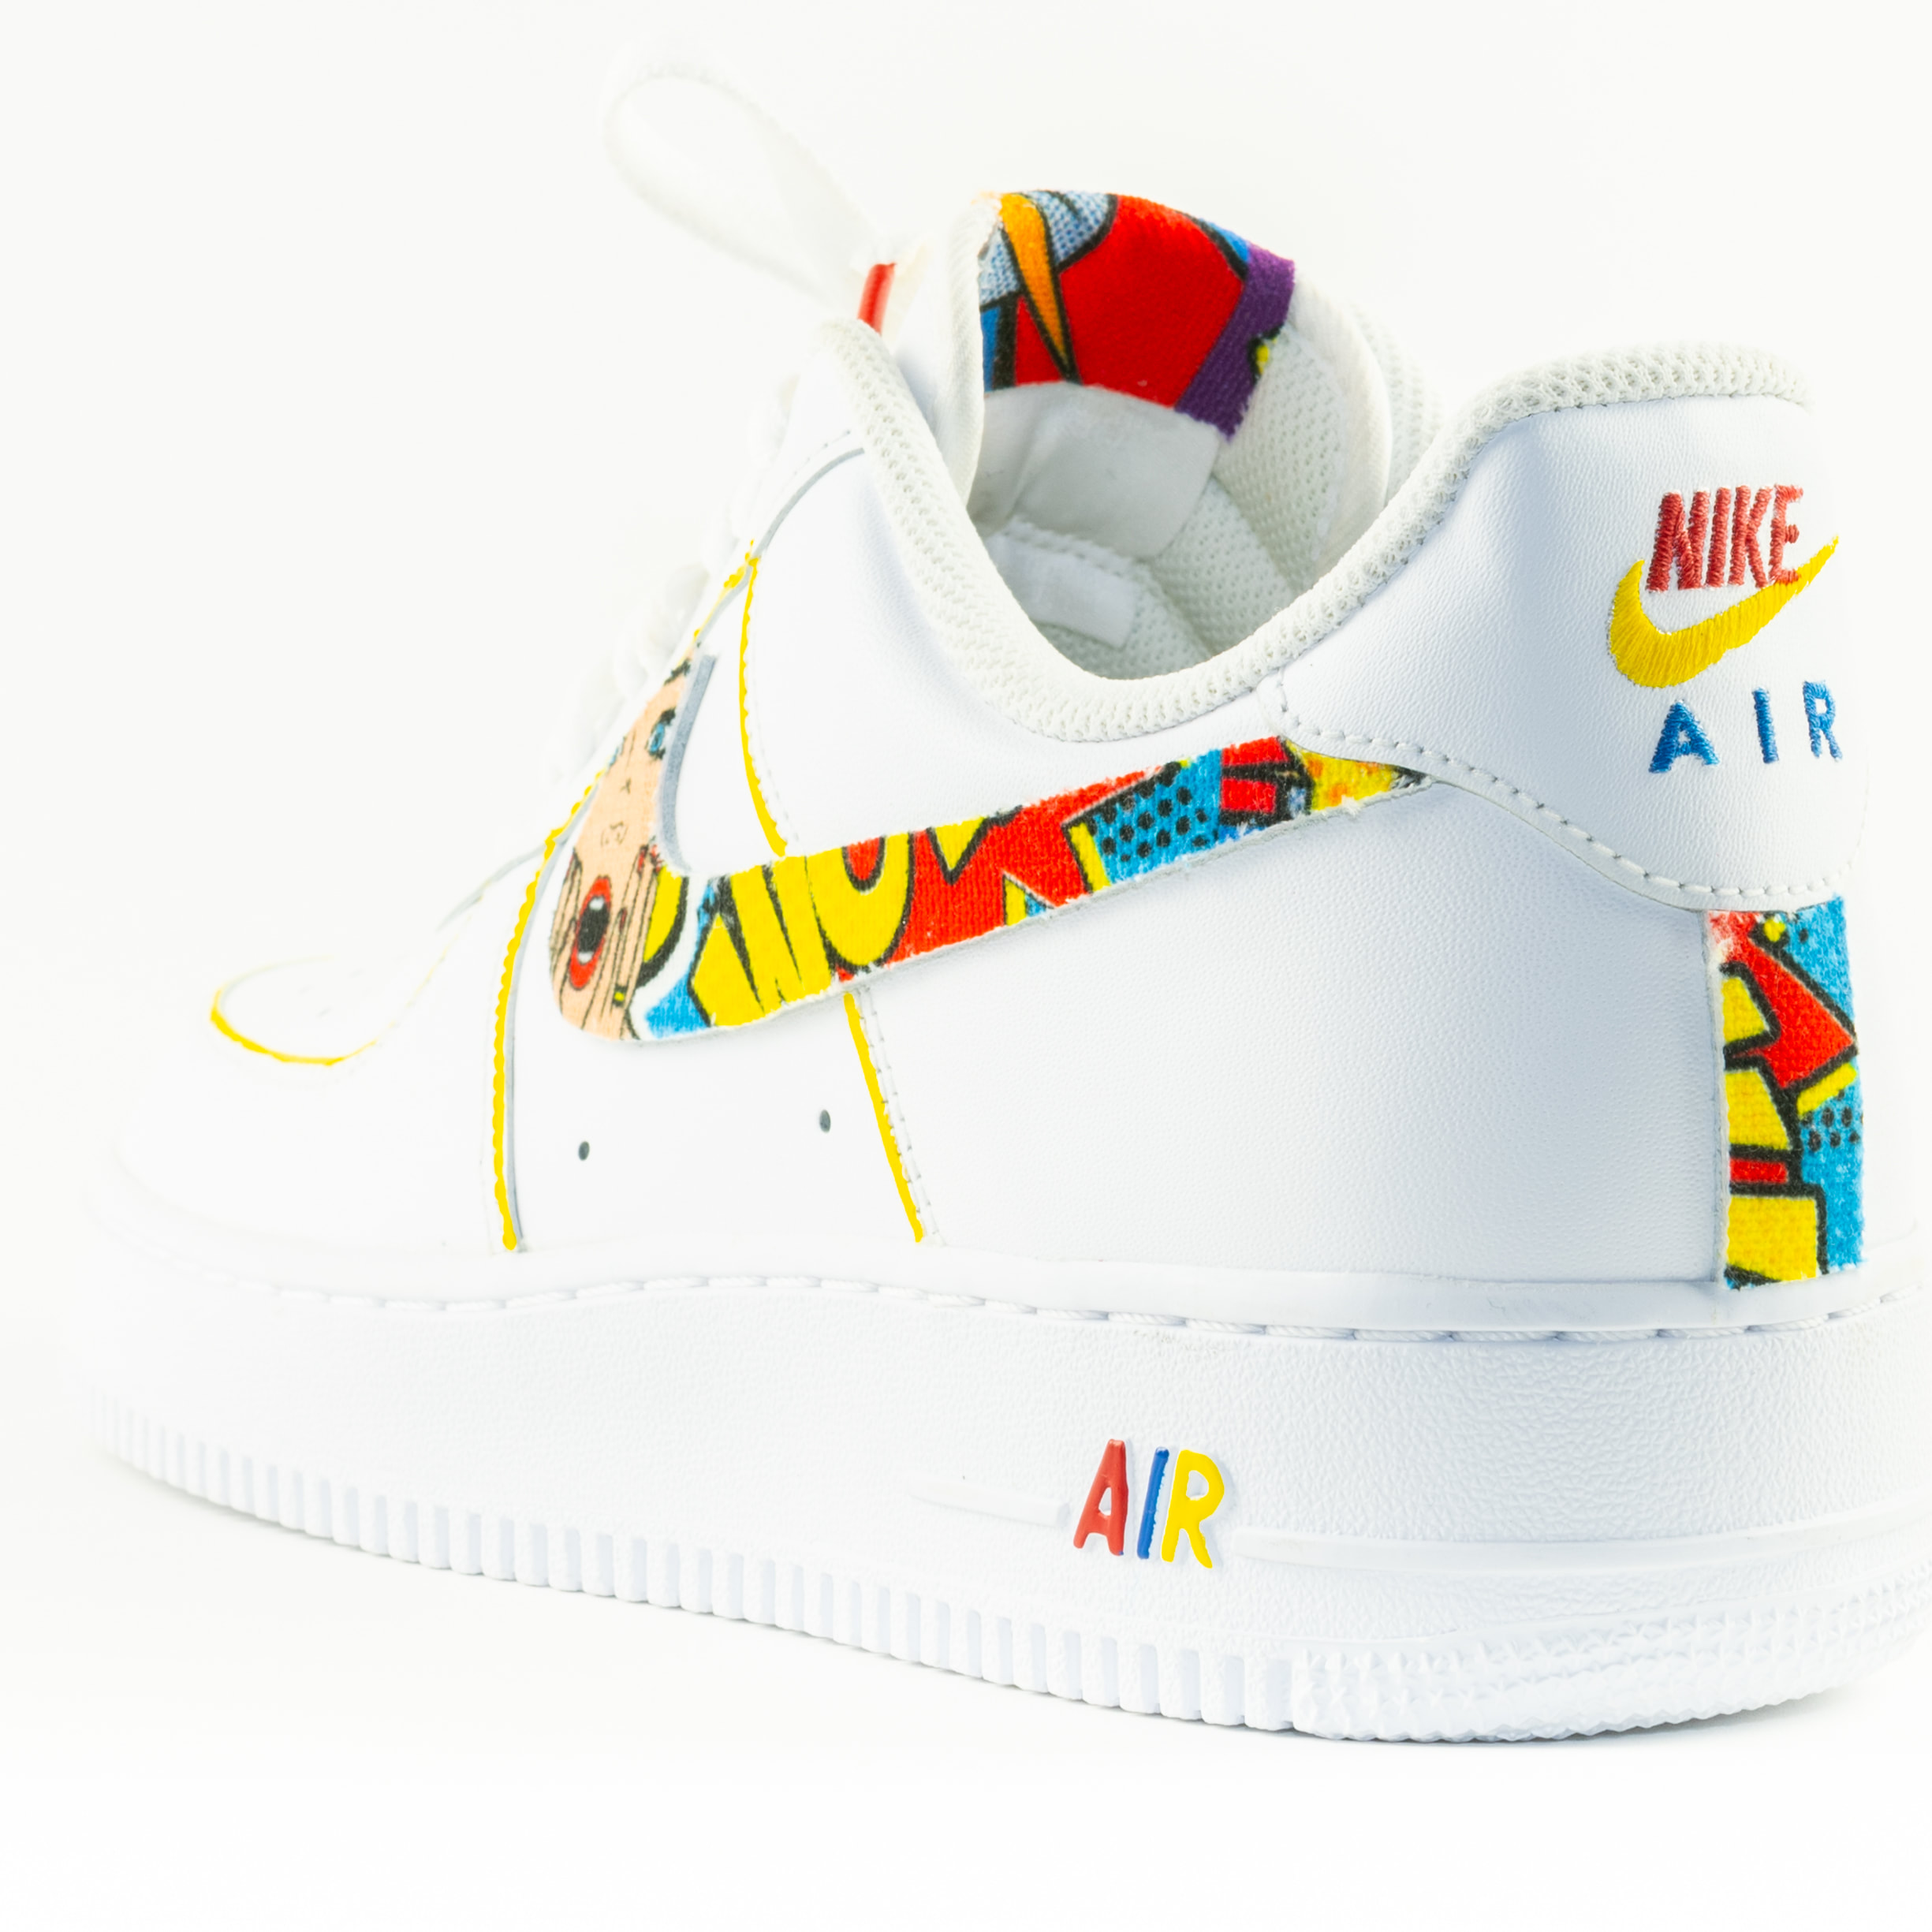 are nike air force 1 popular